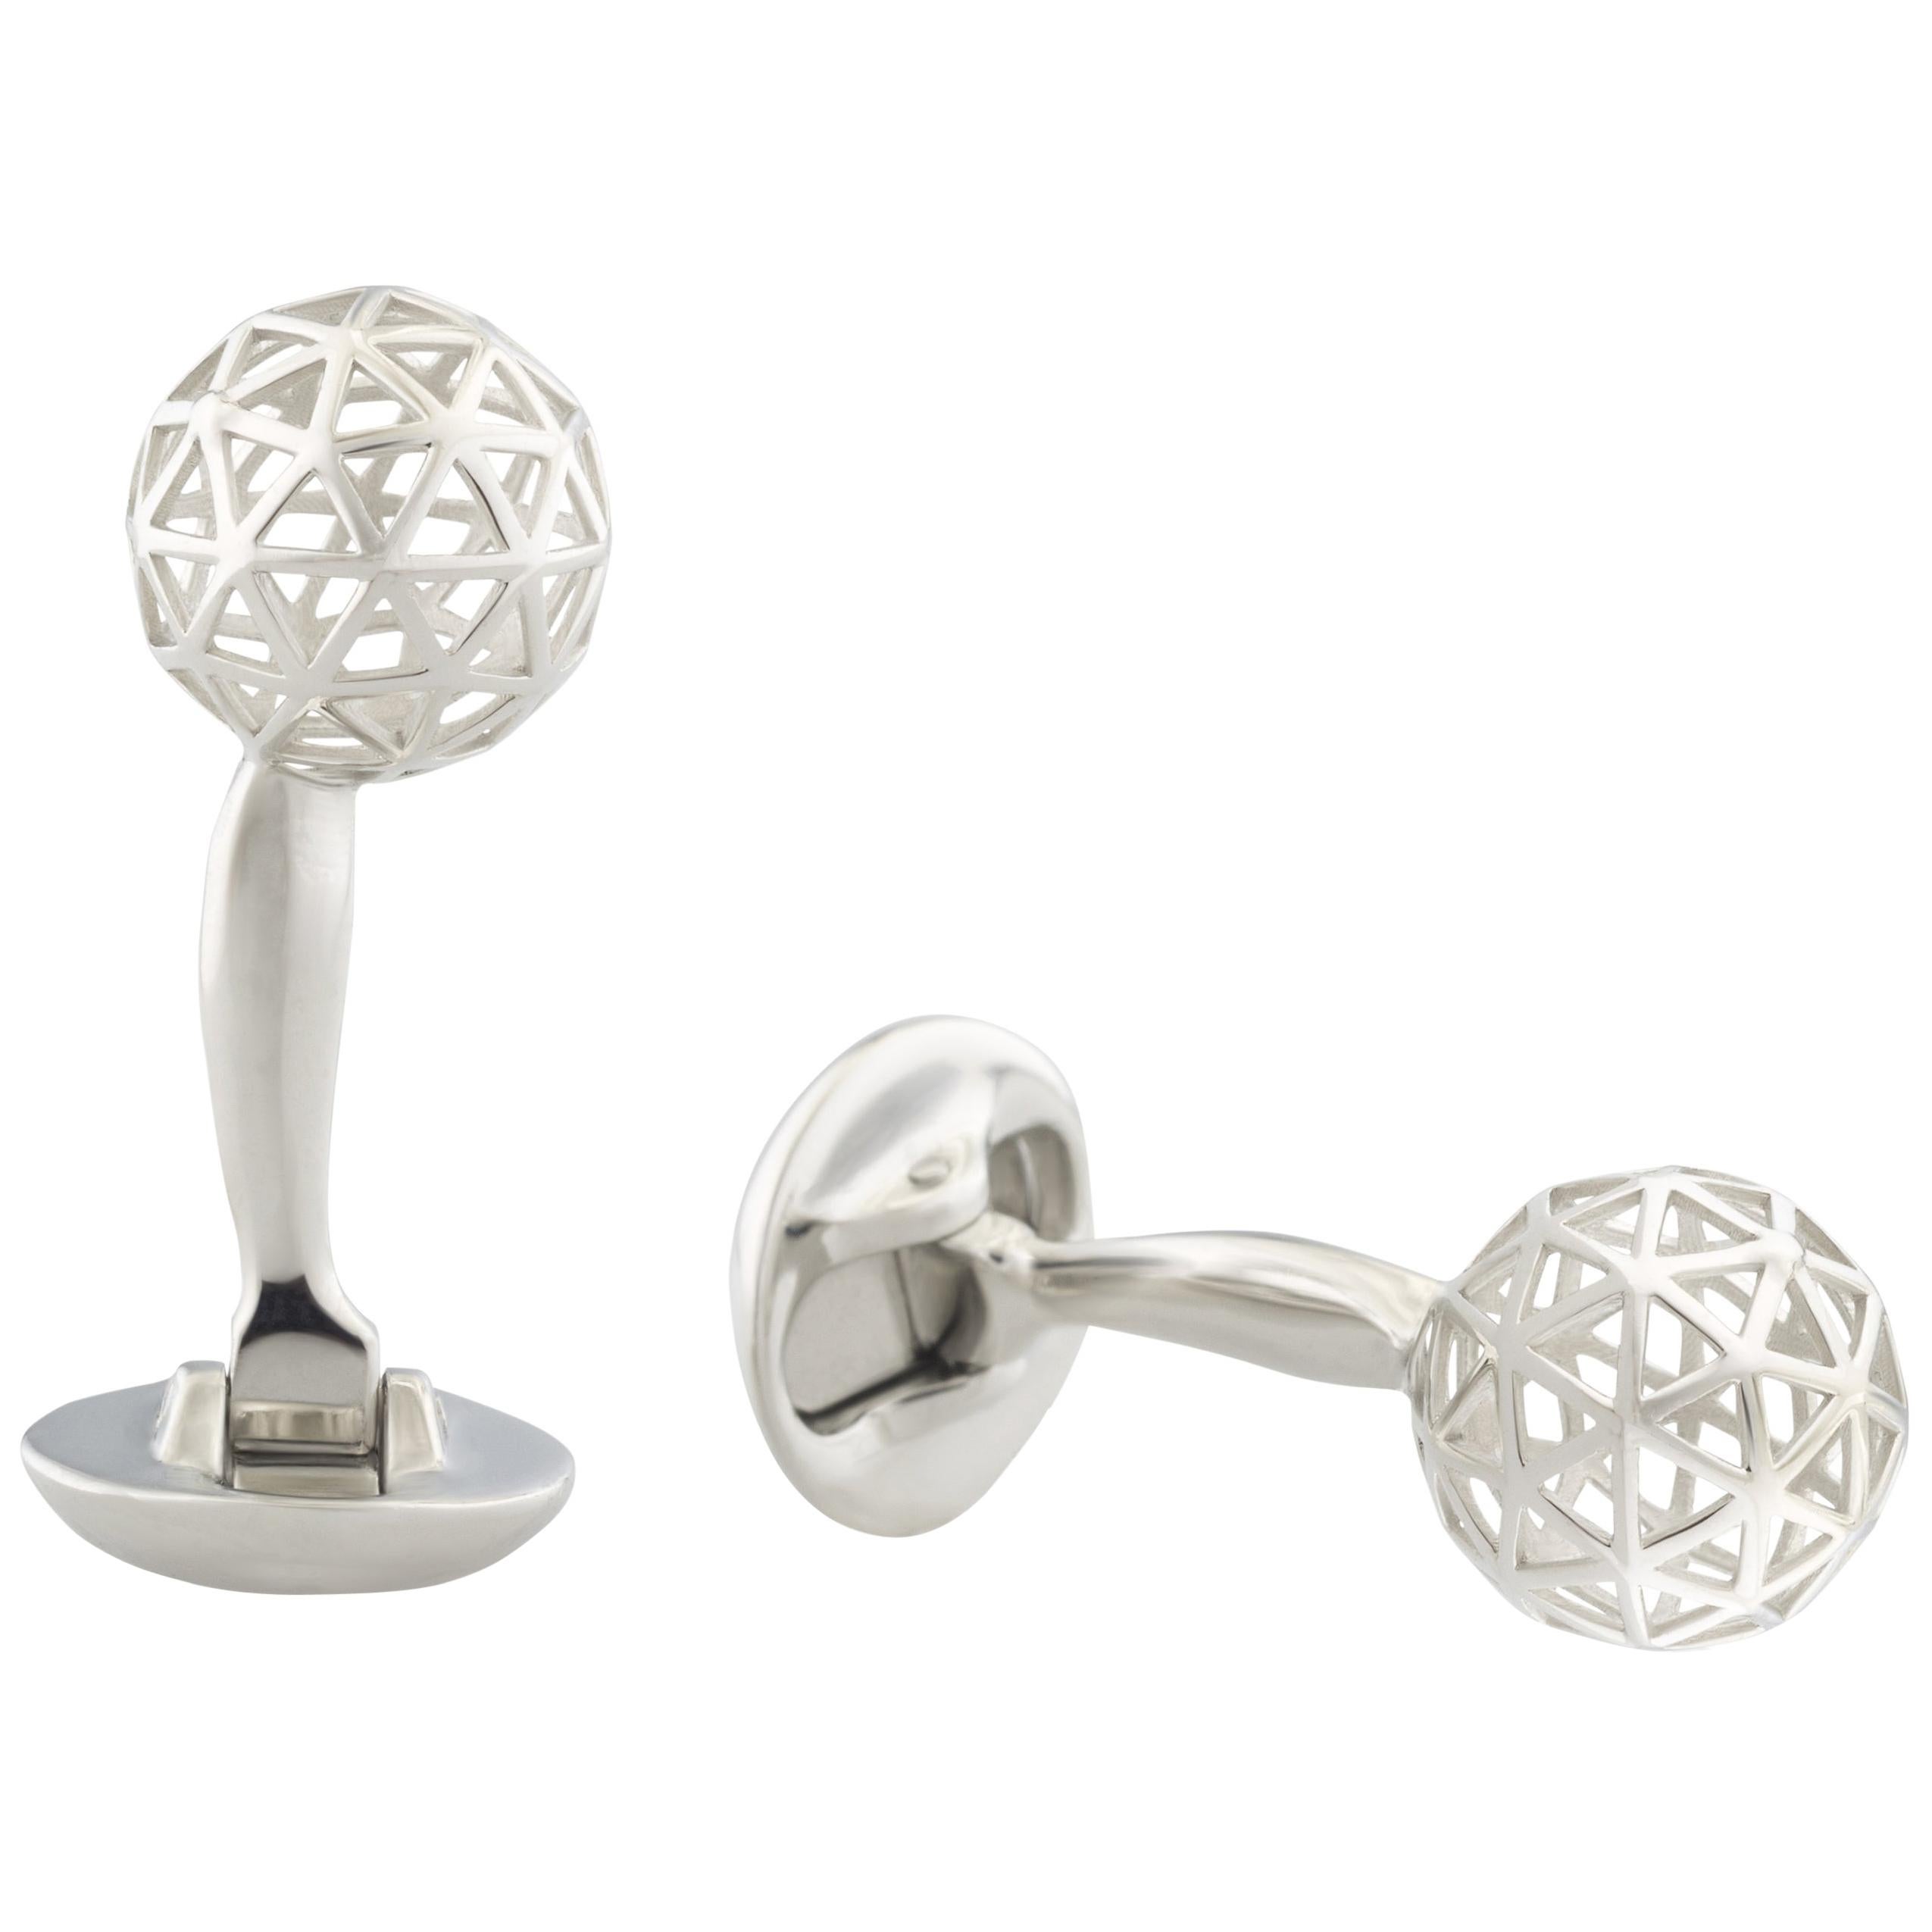 Sphere Geometric Cufflinks in Rhodium-plated Sterling Silver by Fils Unique